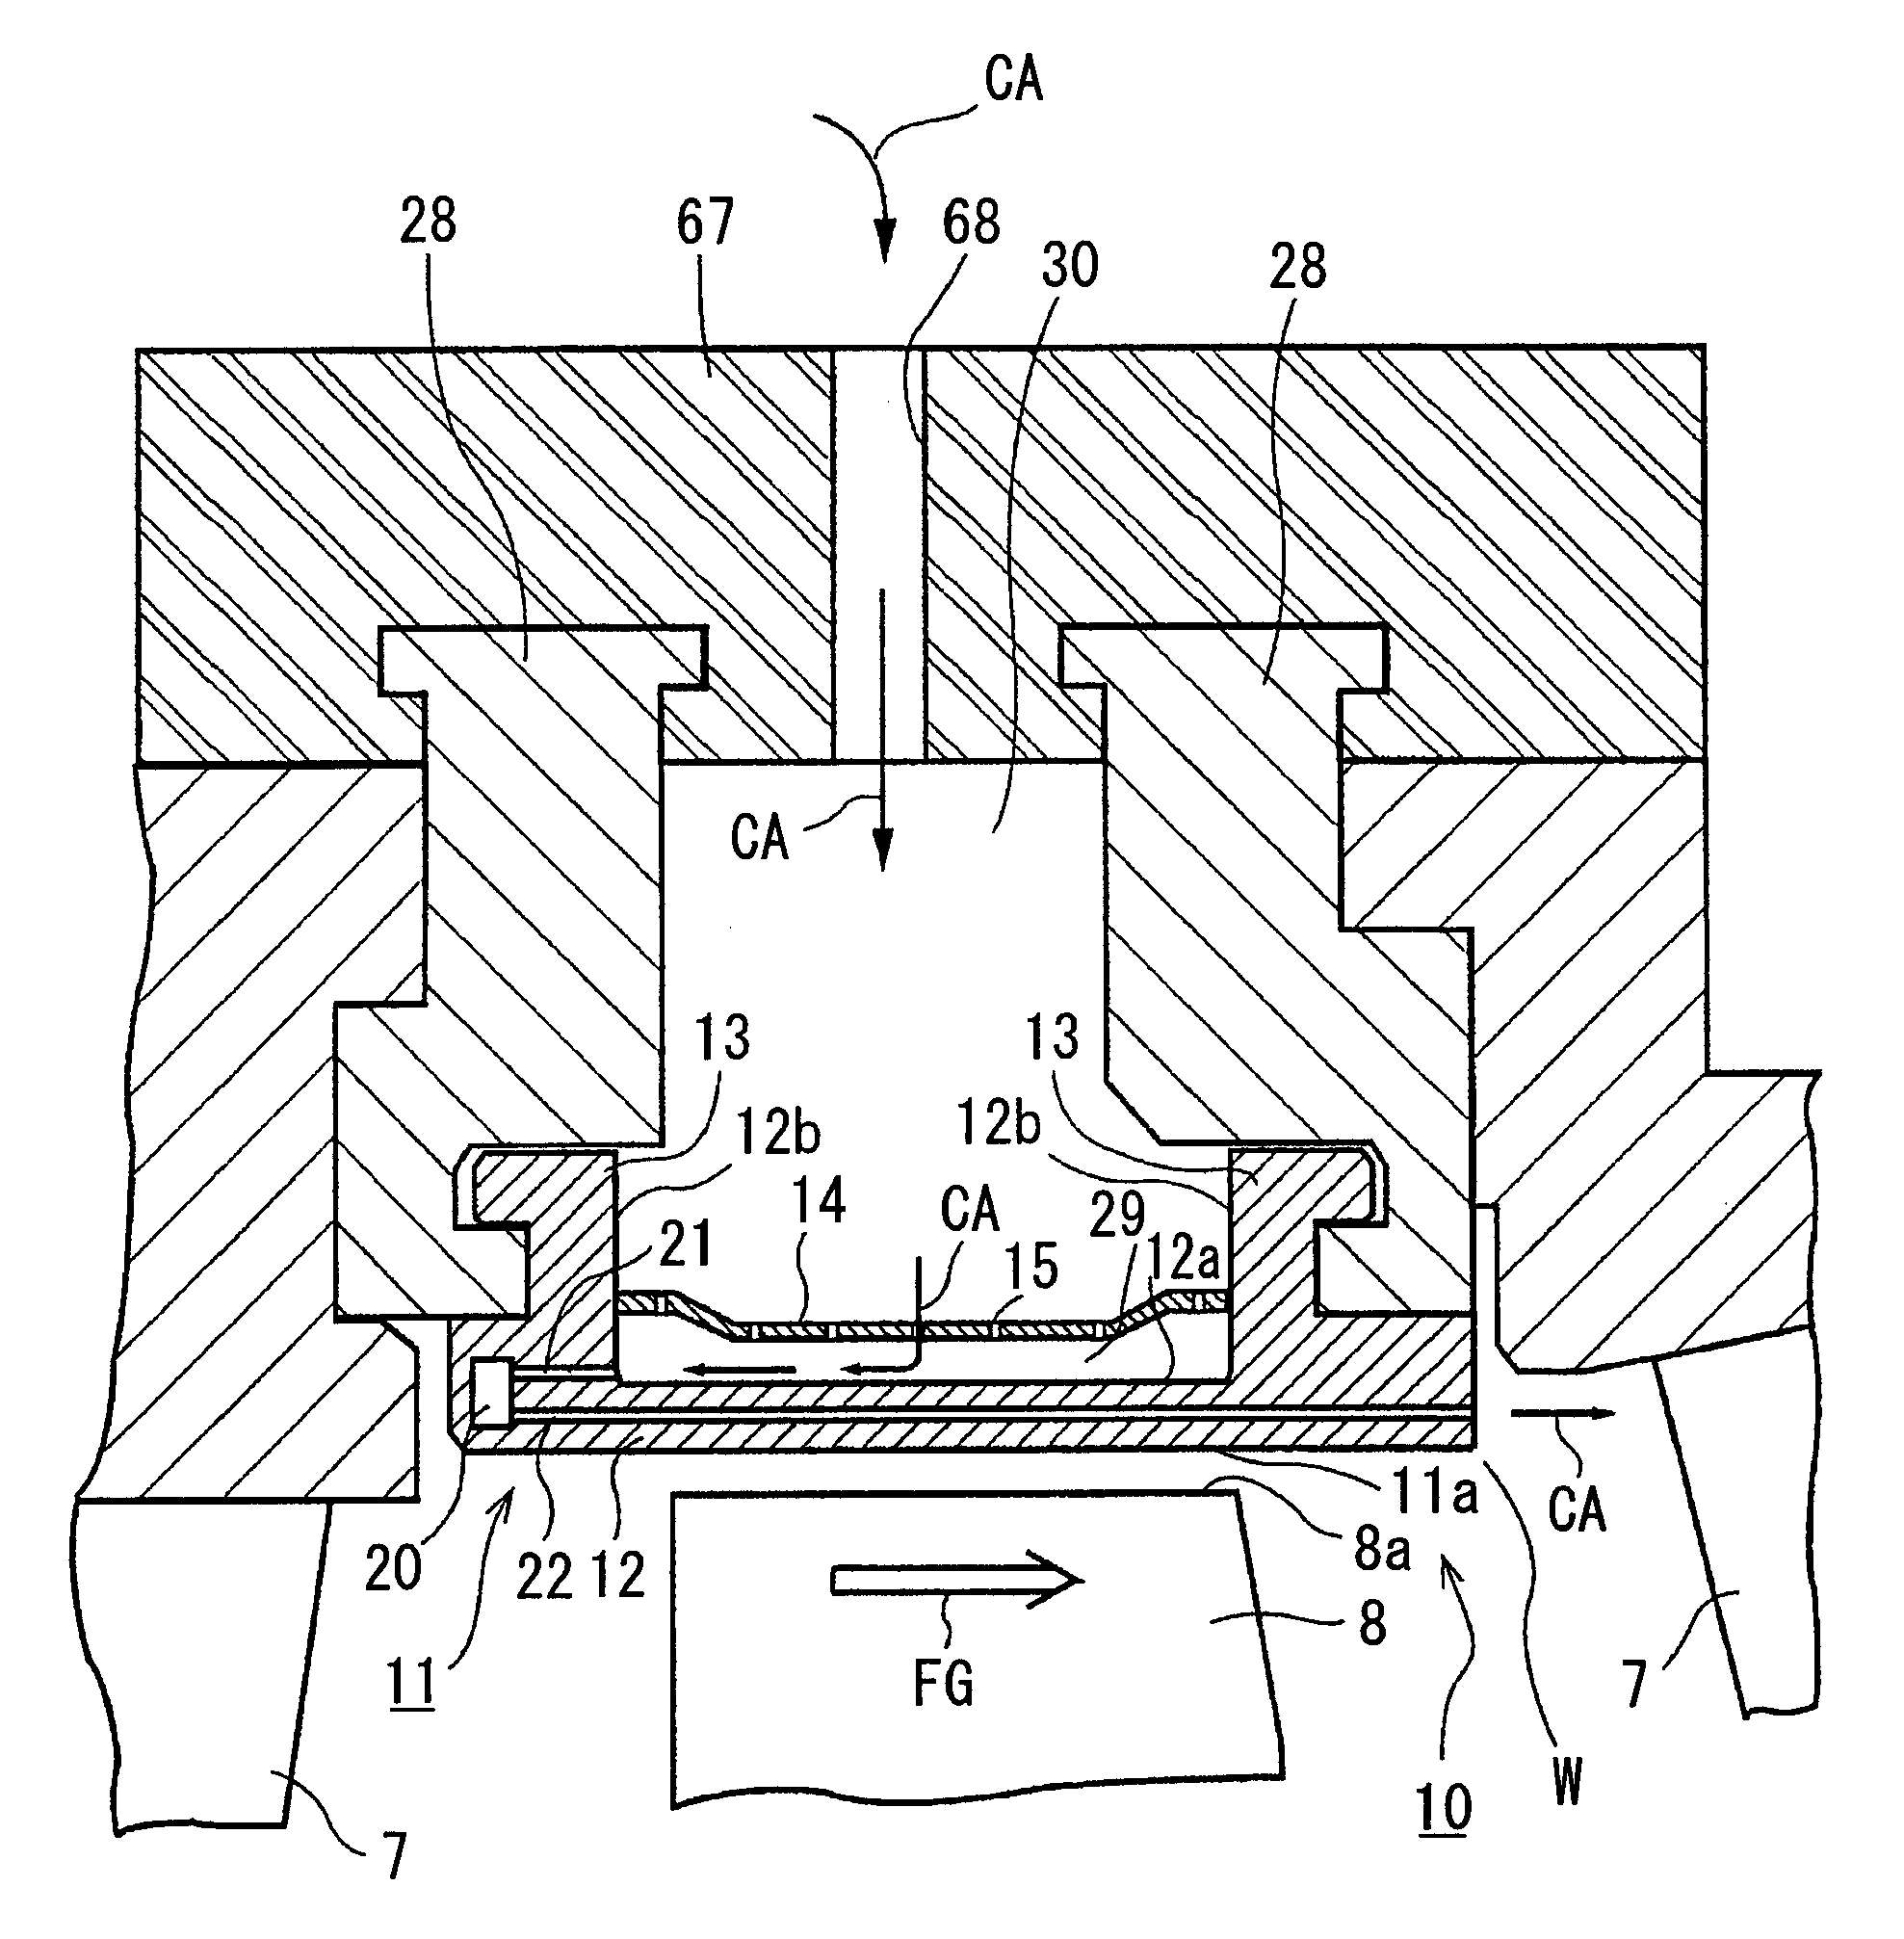 Cooling system of ring segment and gas turbine